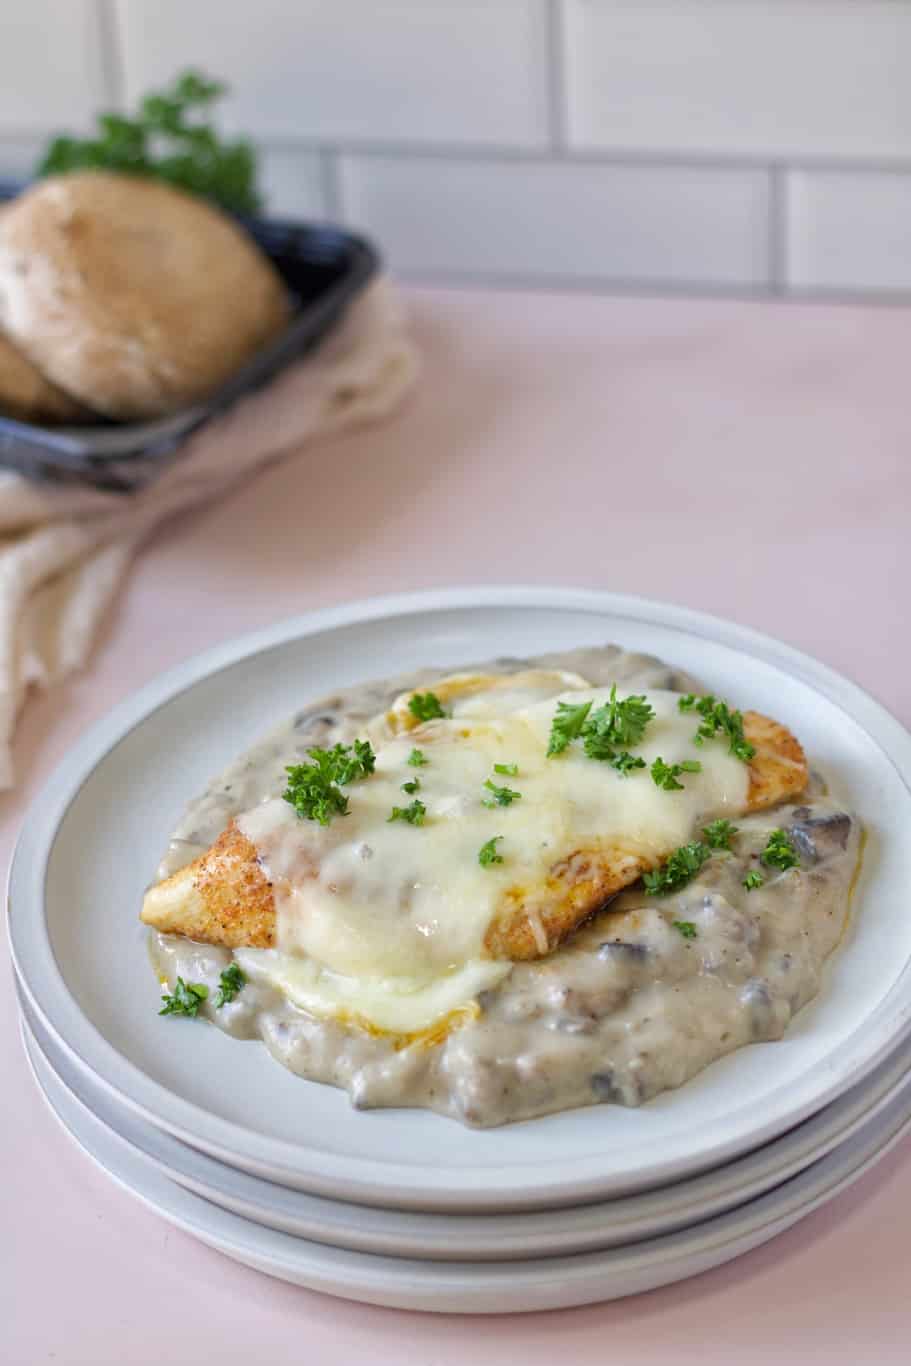 a slice of chicken breast swimming in a creamy mushroom sauce, topped with cheese, and garnished with parsley.